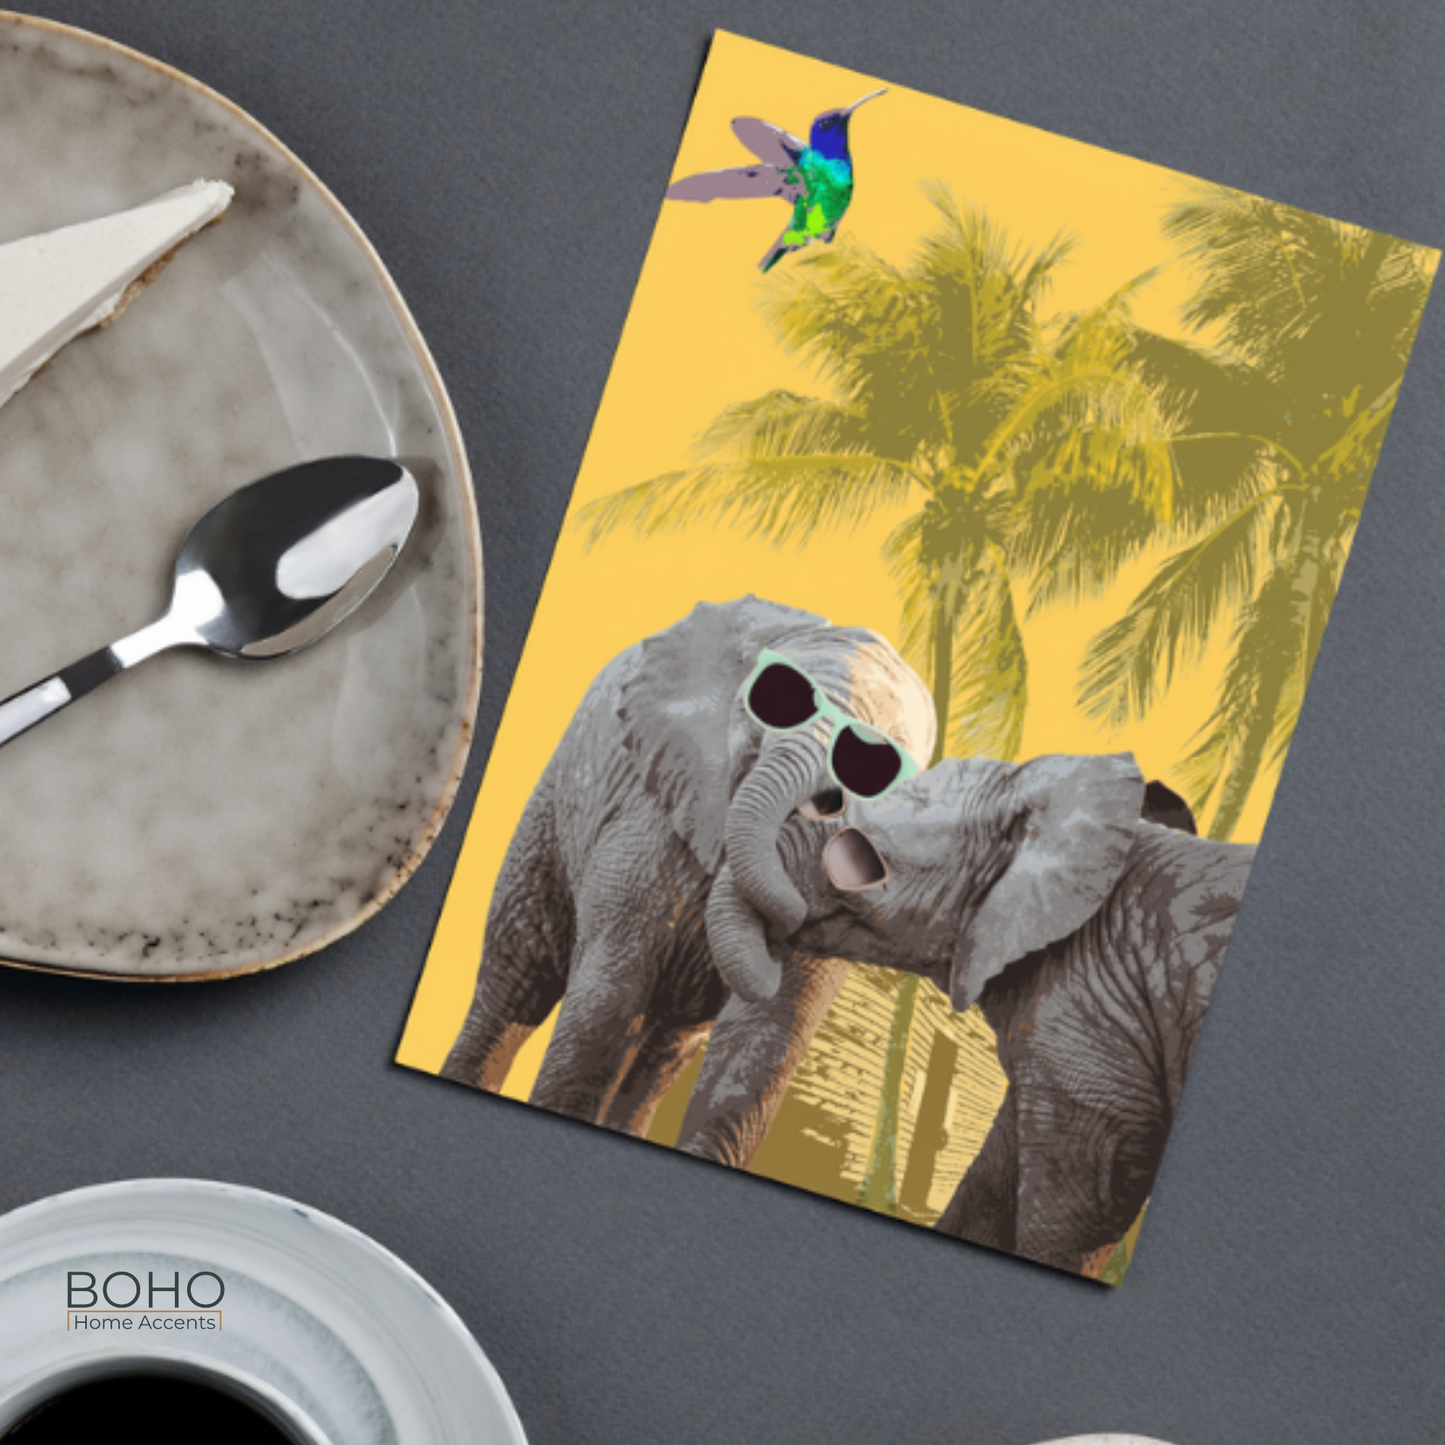 Art Card, Happy Elephants everyday Greeting Card, Birthday Card, All occasions blank note card, Blank inside, 5x7 with envelope | Boho Home Accents